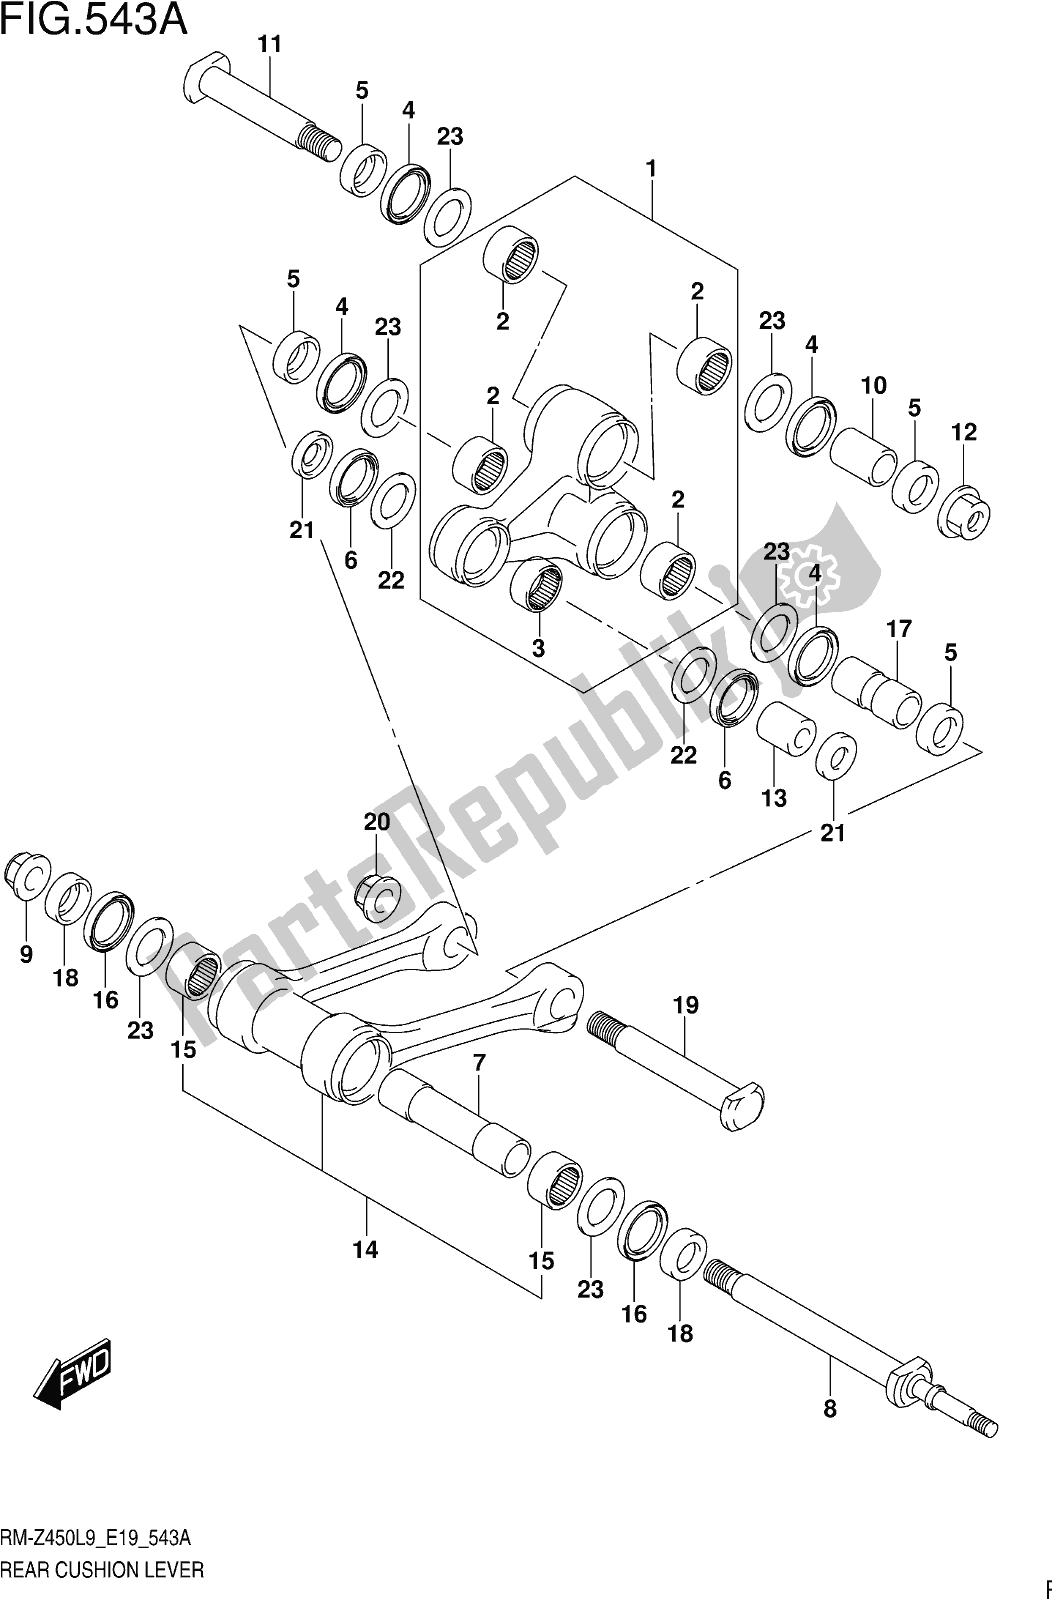 All parts for the Fig. 543a Rear Cushion Lever of the Suzuki RM-Z 450 2019